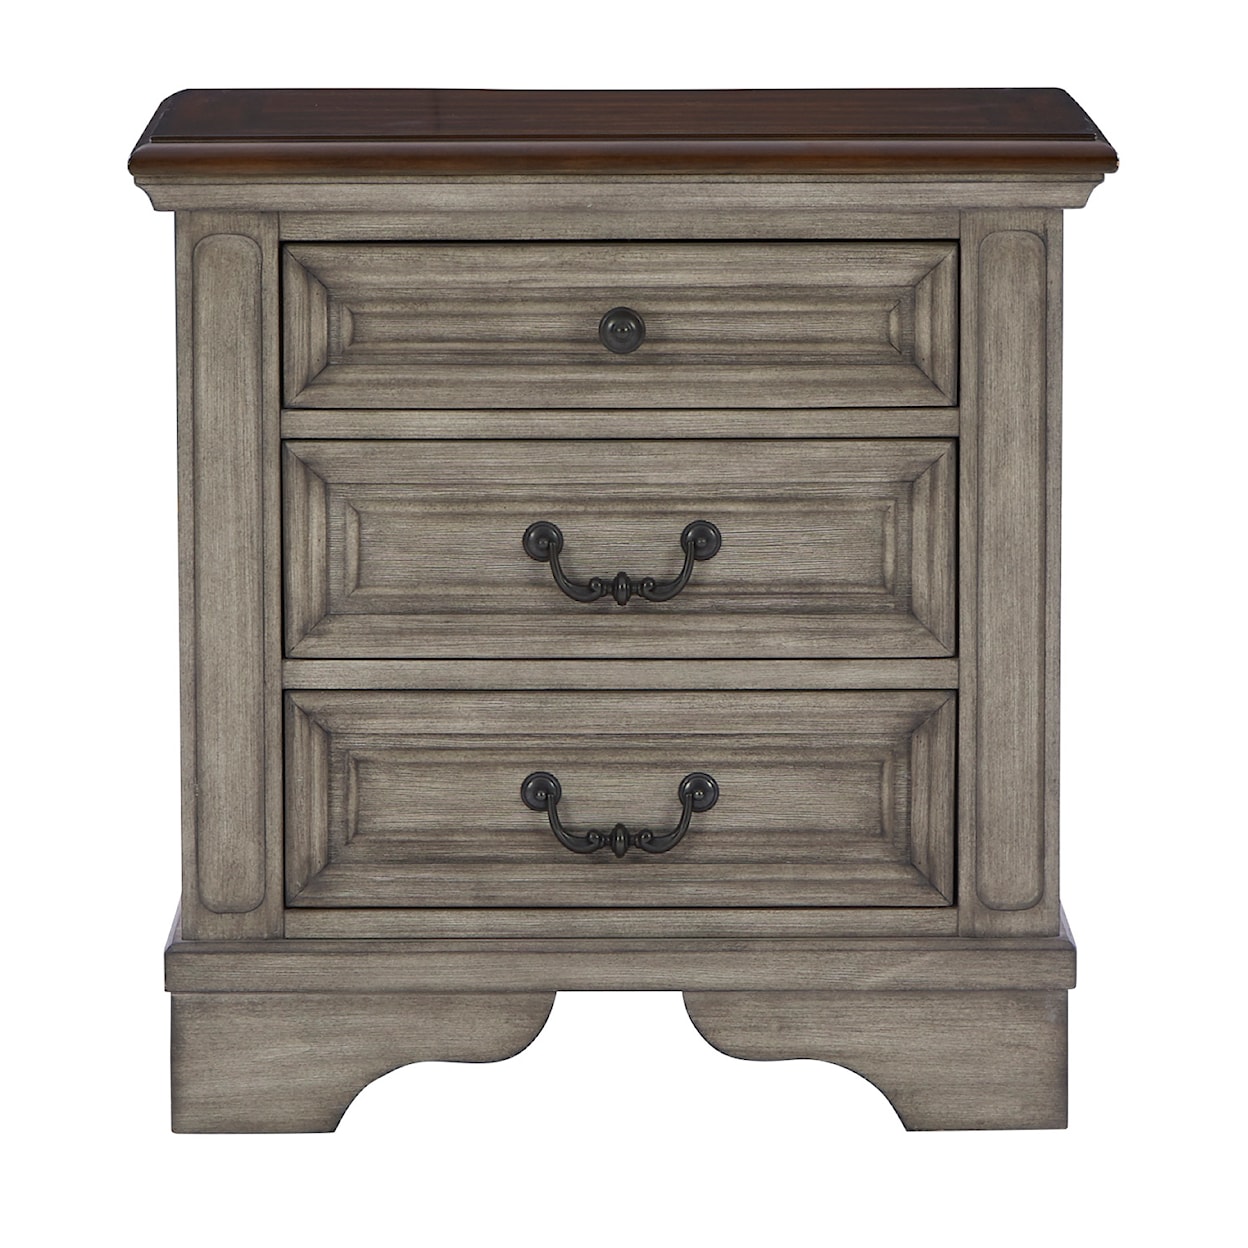 Signature Design by Ashley Lodenbay Nightstand